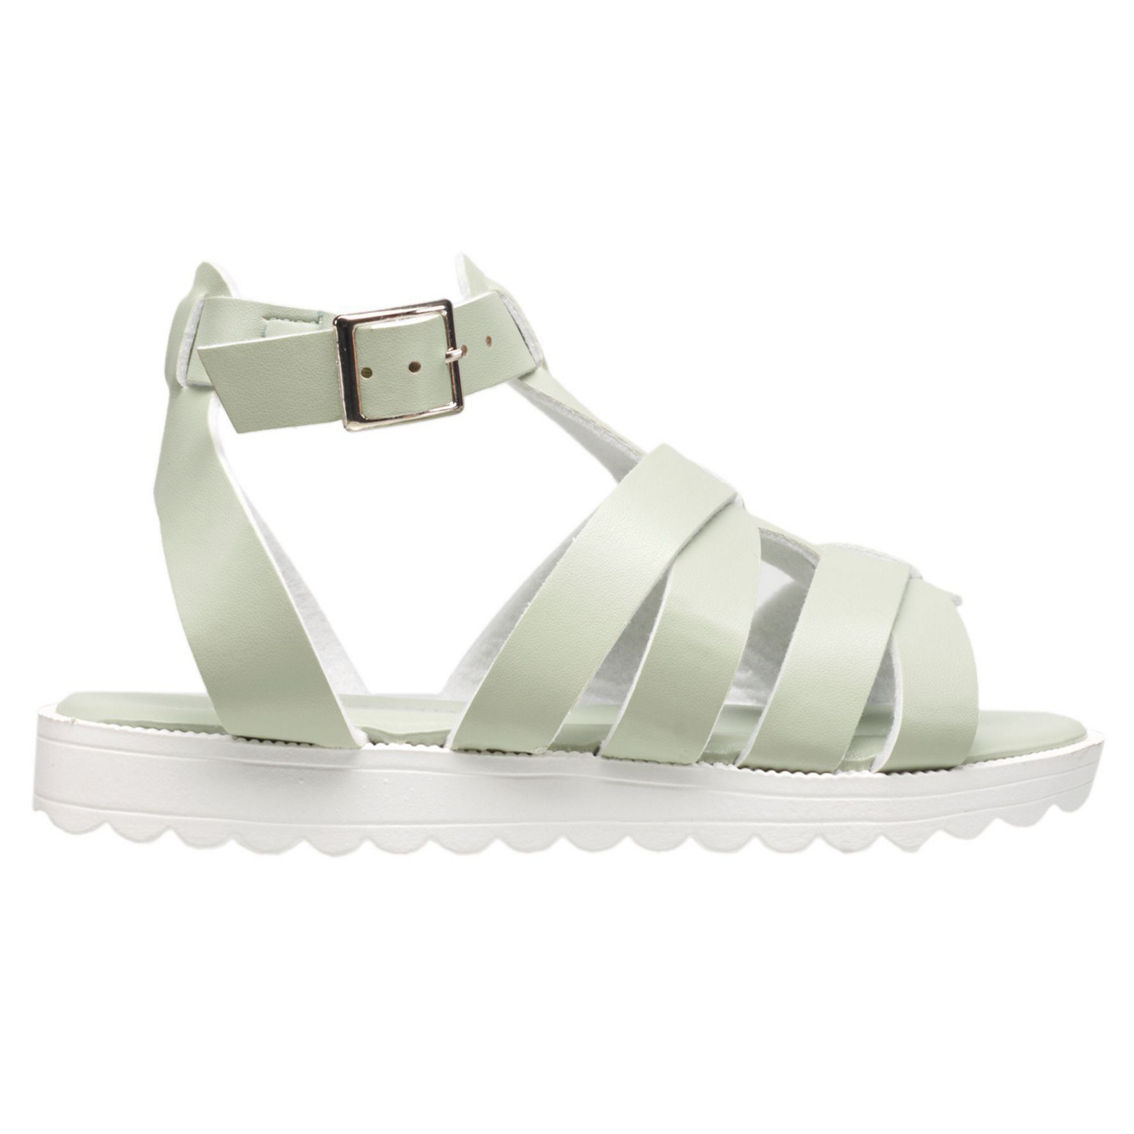 GILLY SANDAL - Image 2 of 5